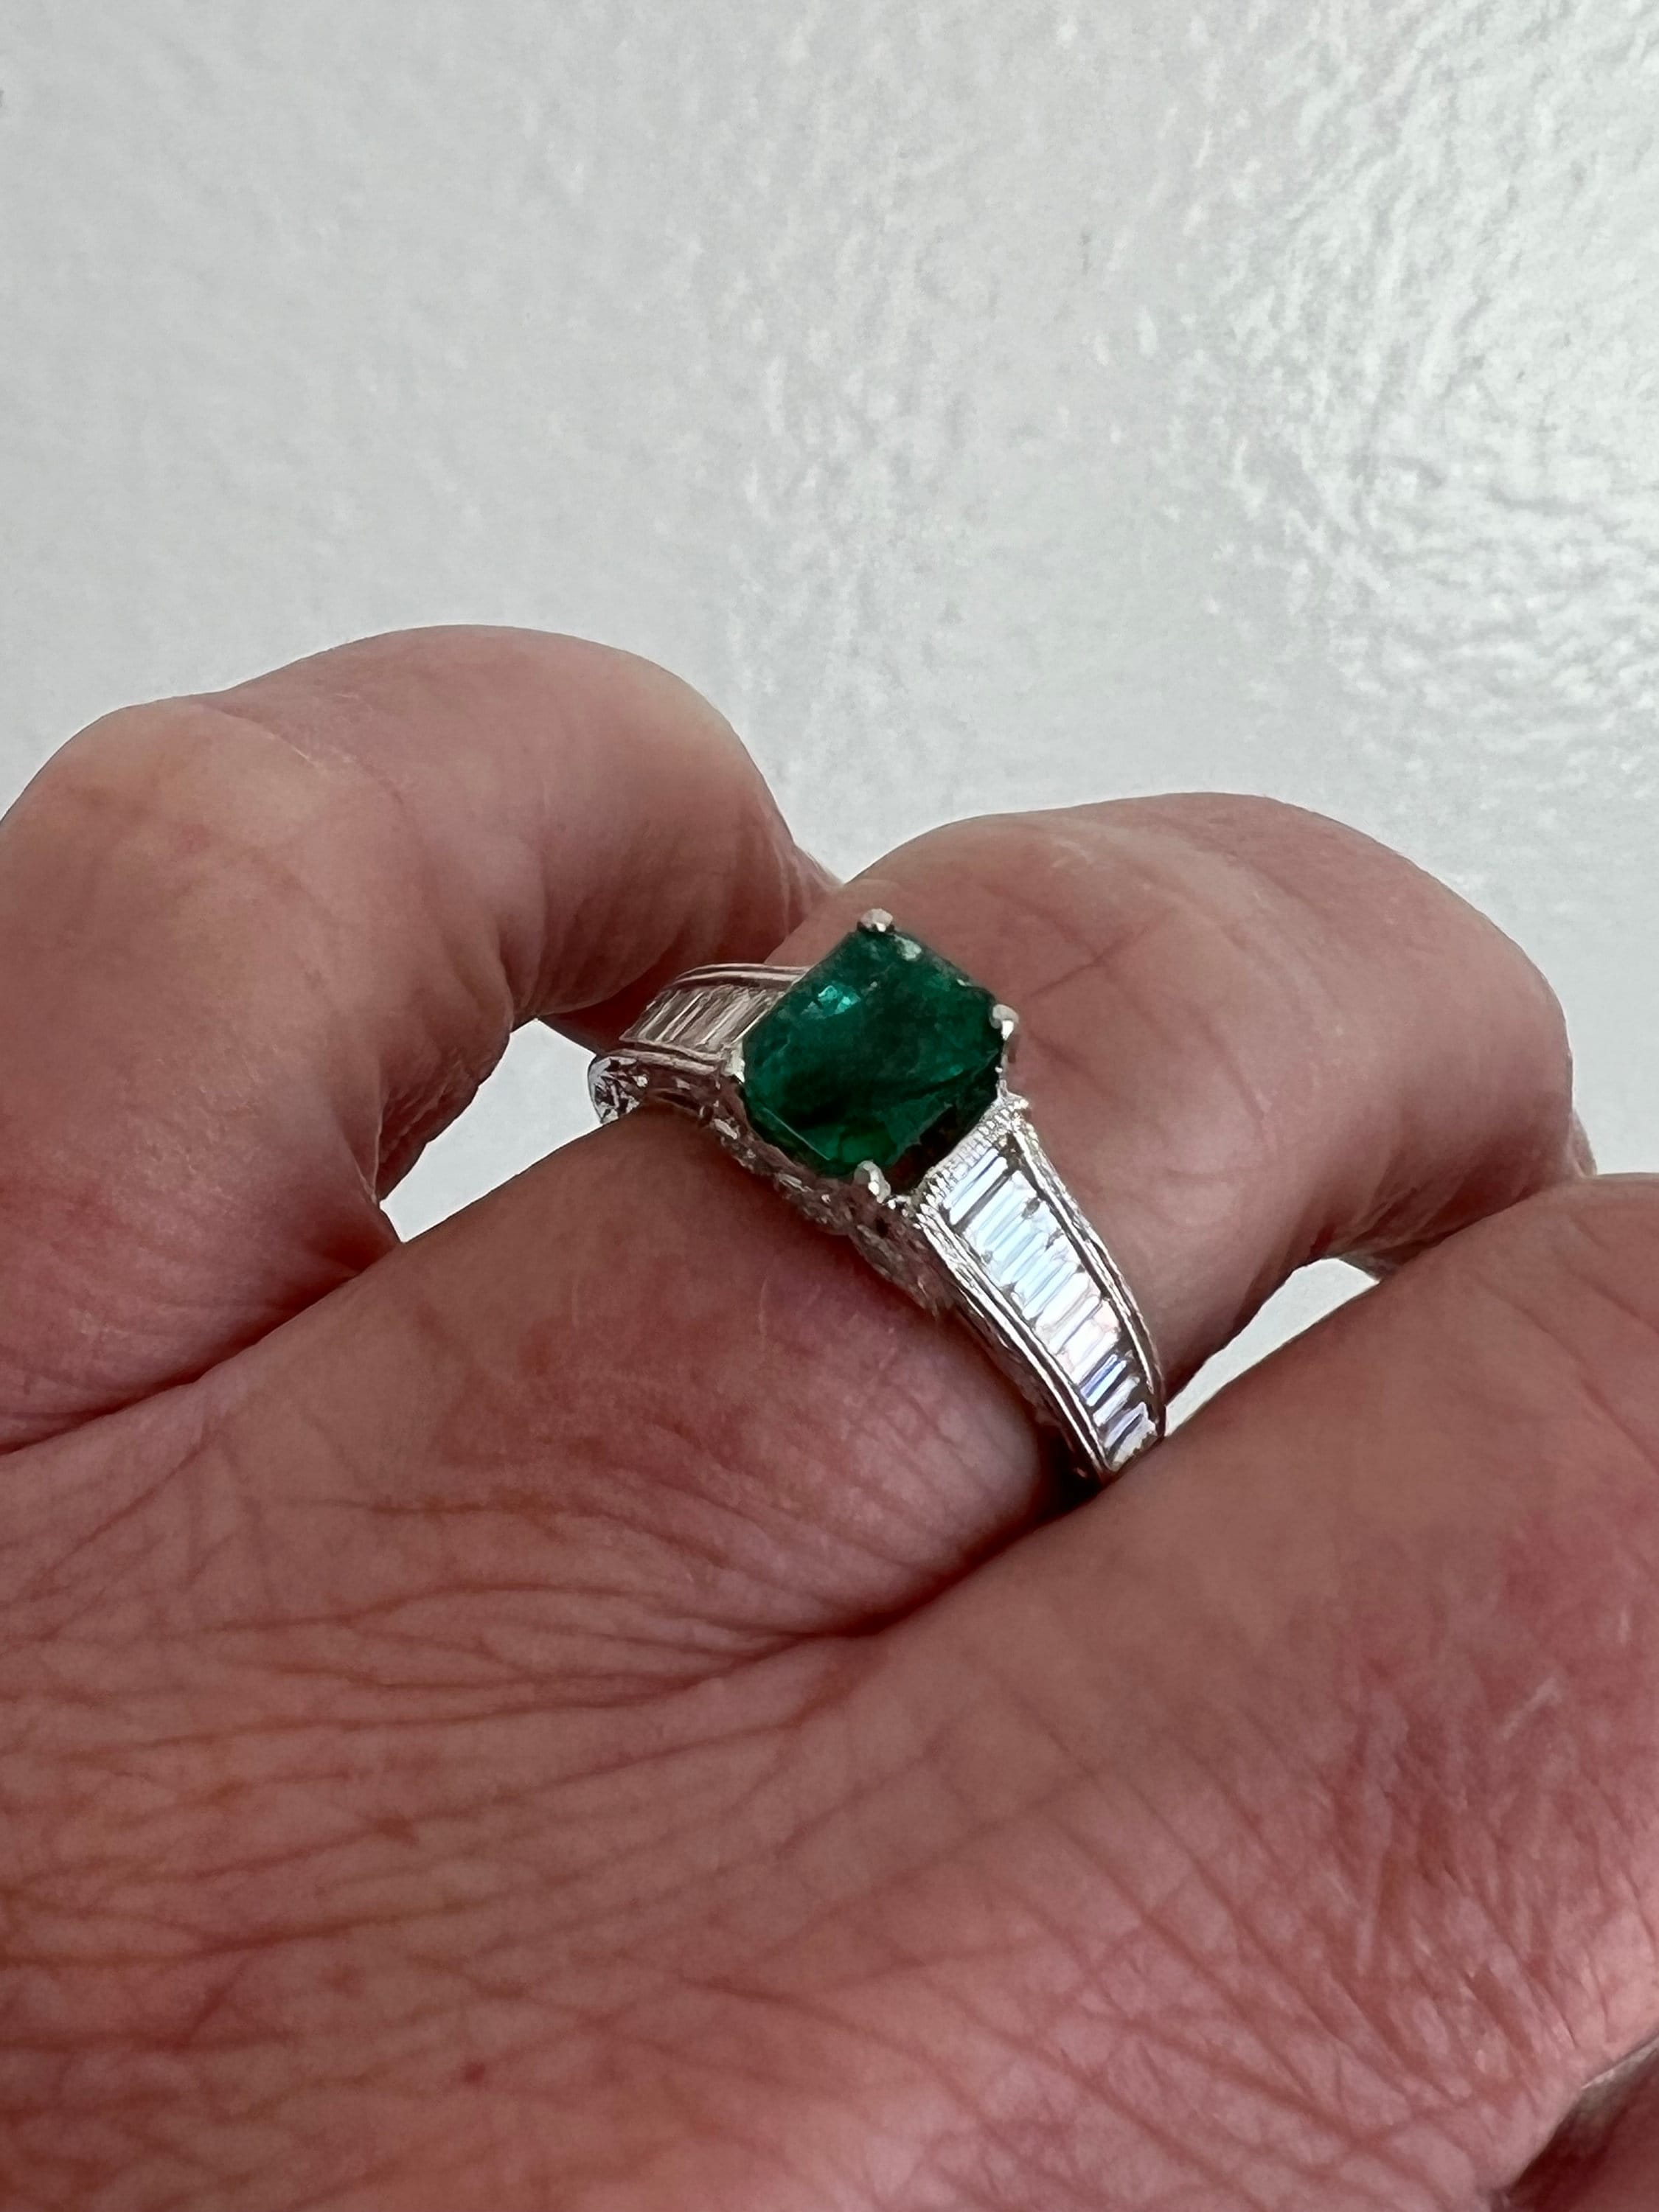 Beautiful Vintage 18K White Gold Diamond and Emerald Ring with Baguettes- 2.15ct.